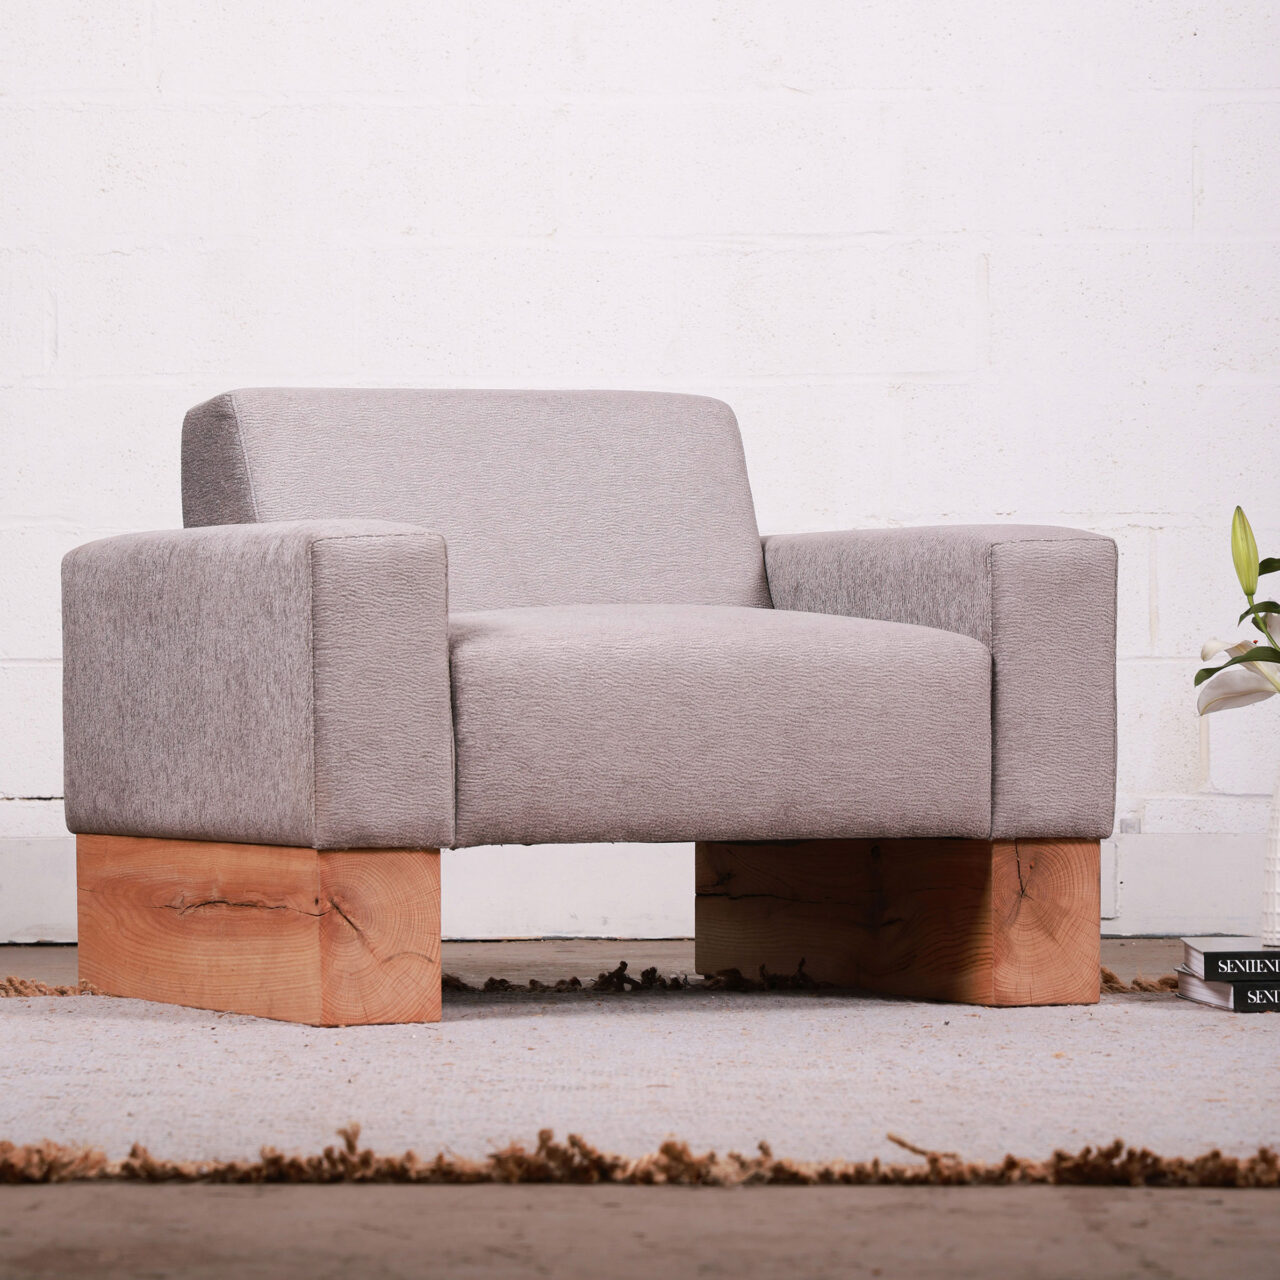 The Beam luxury Sofa by SENTIENT Furniture, with its clean lines and pale grey upholstery, sits on a solid wooden base, offering a modern, plush seating solution against a neutral background.